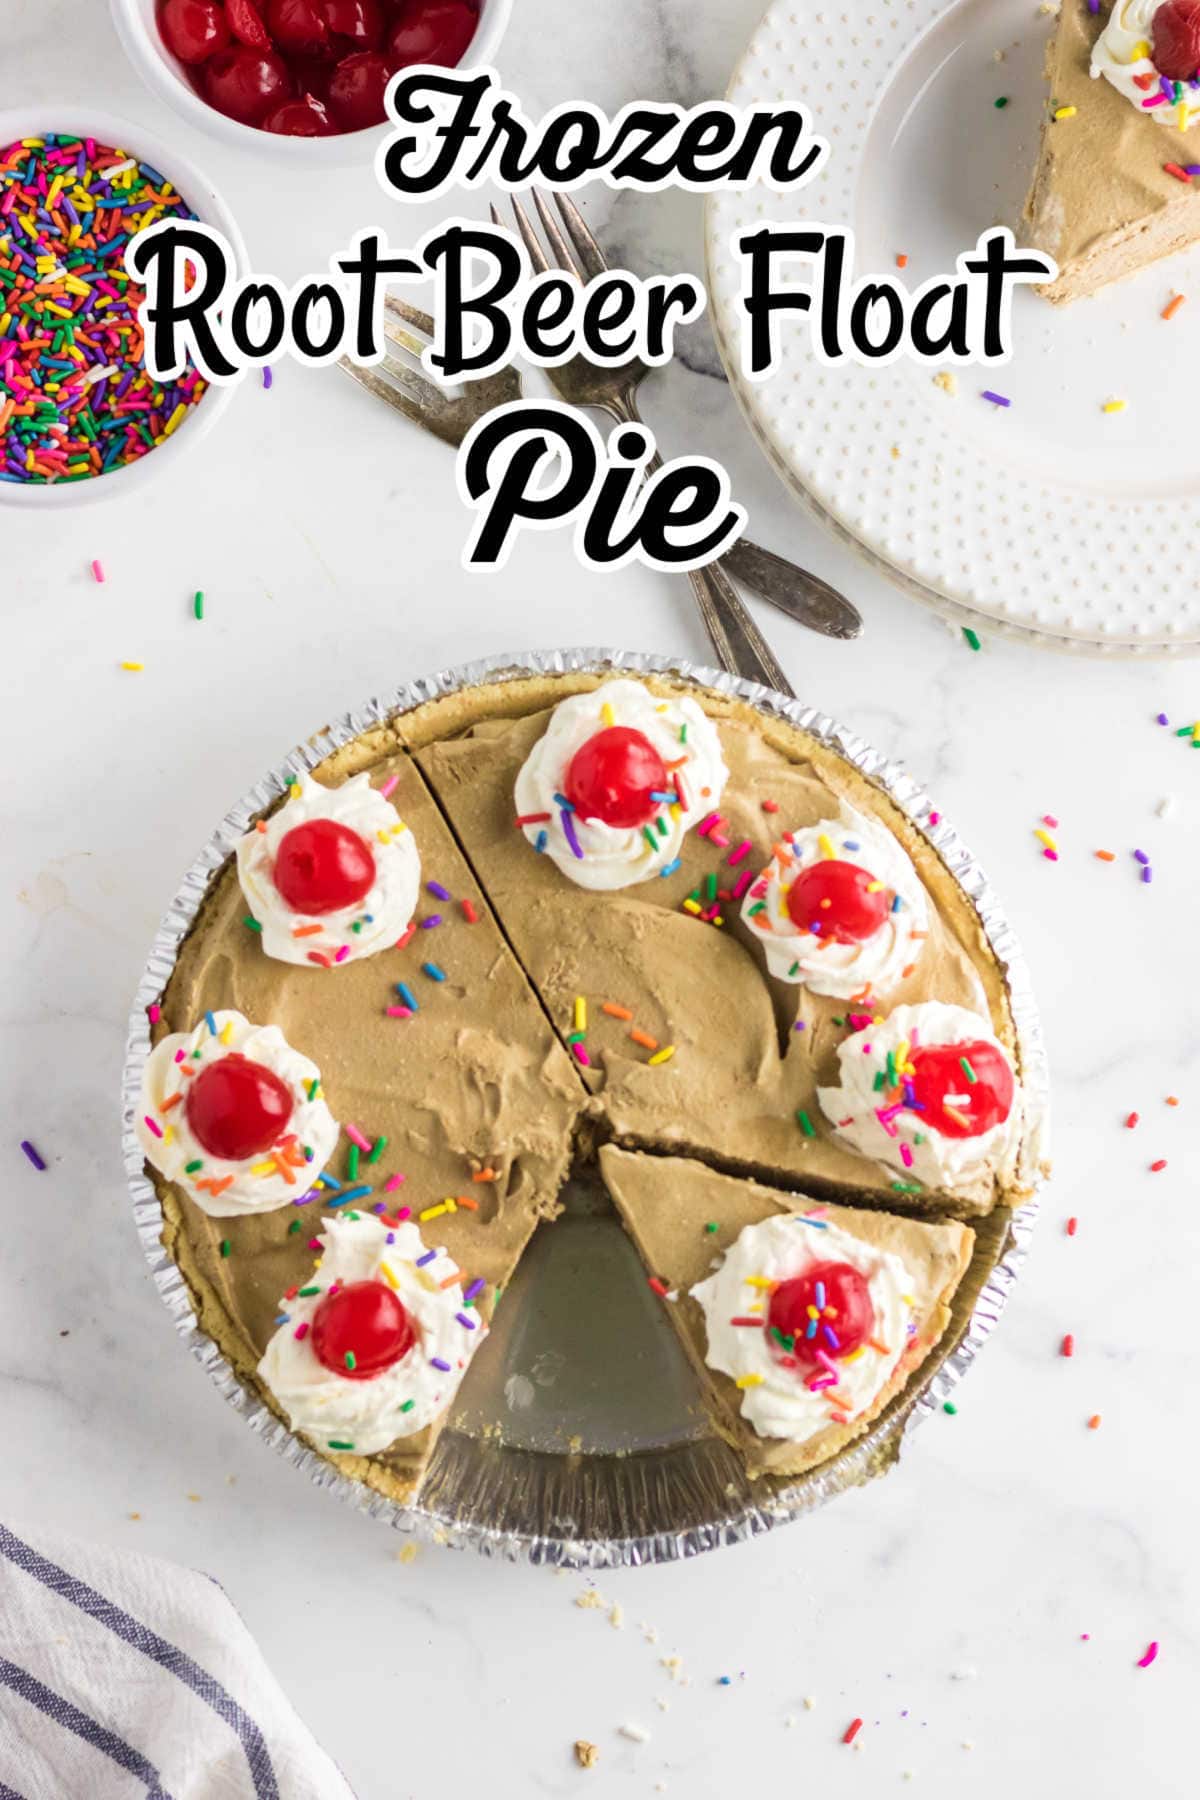 Overhead view of pie with title text overlay.